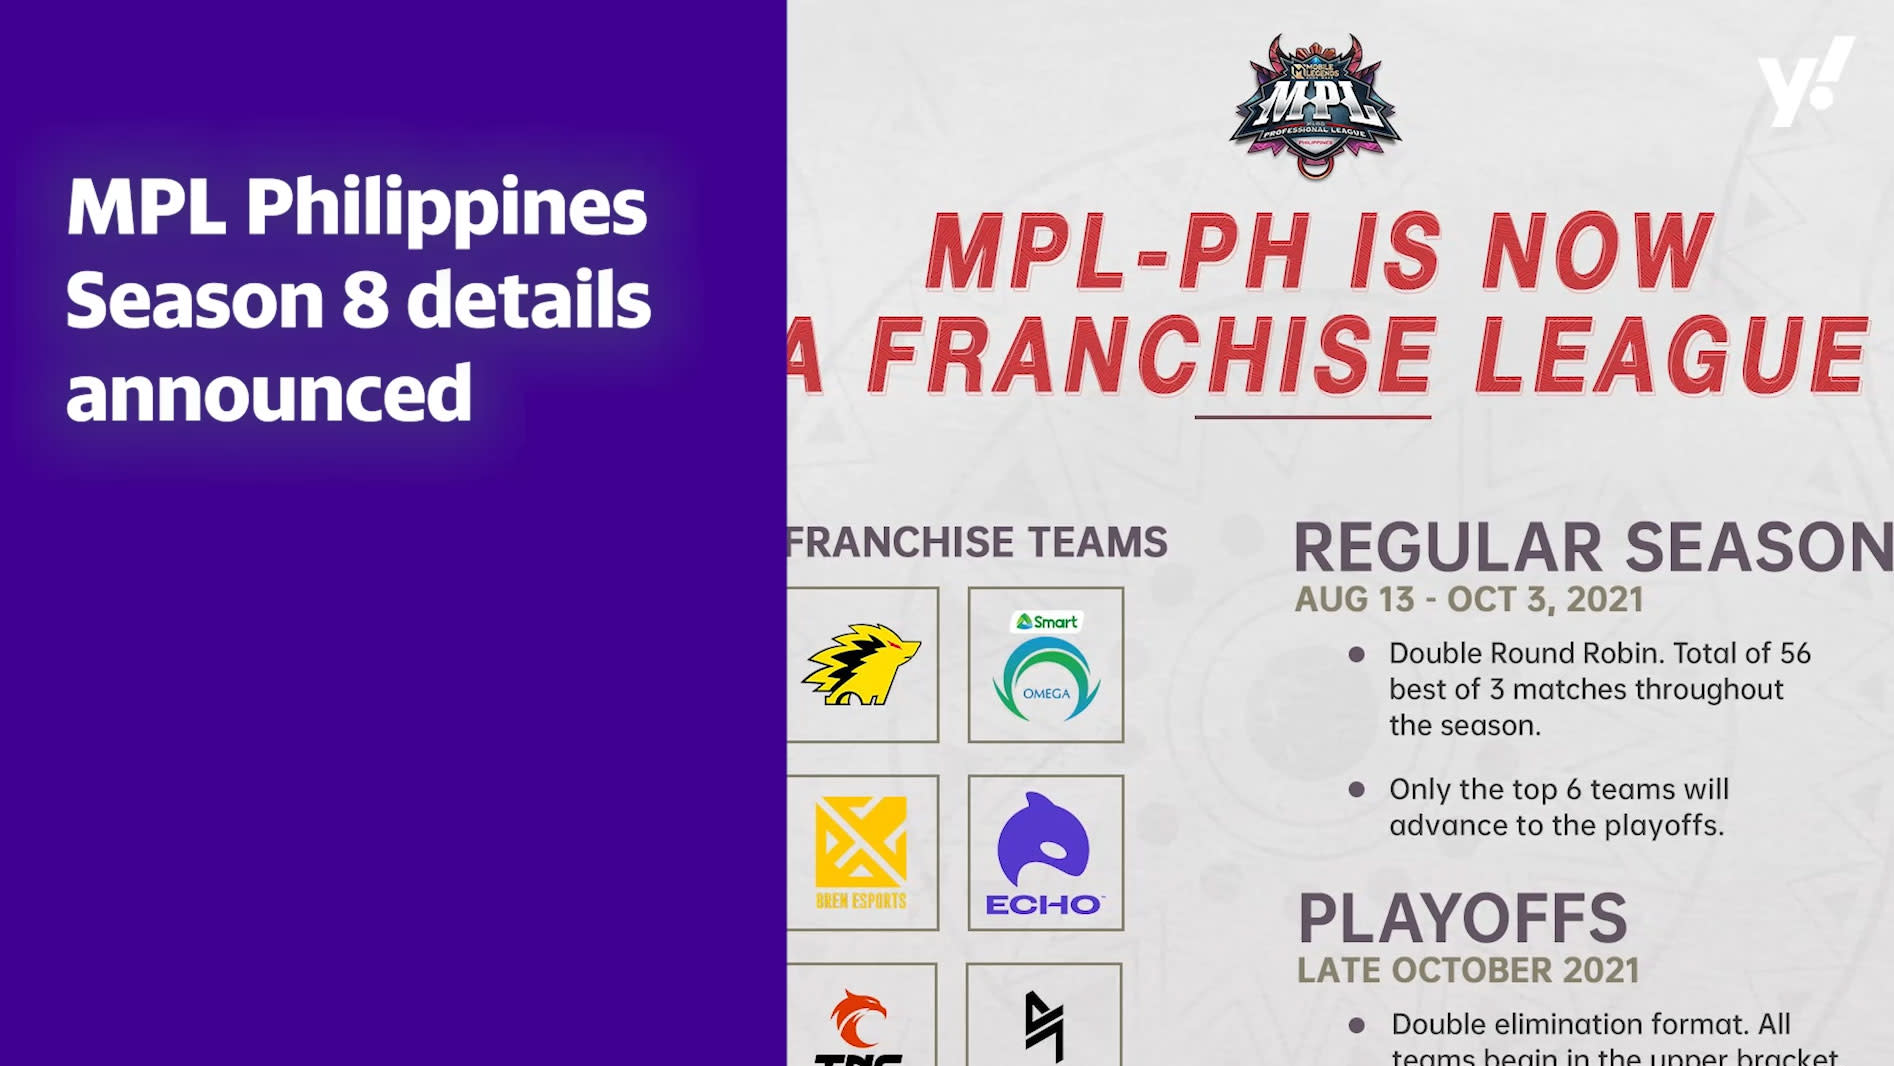 PREVIEW: Teams competing in the MPL Philippines Season 8 playoffs